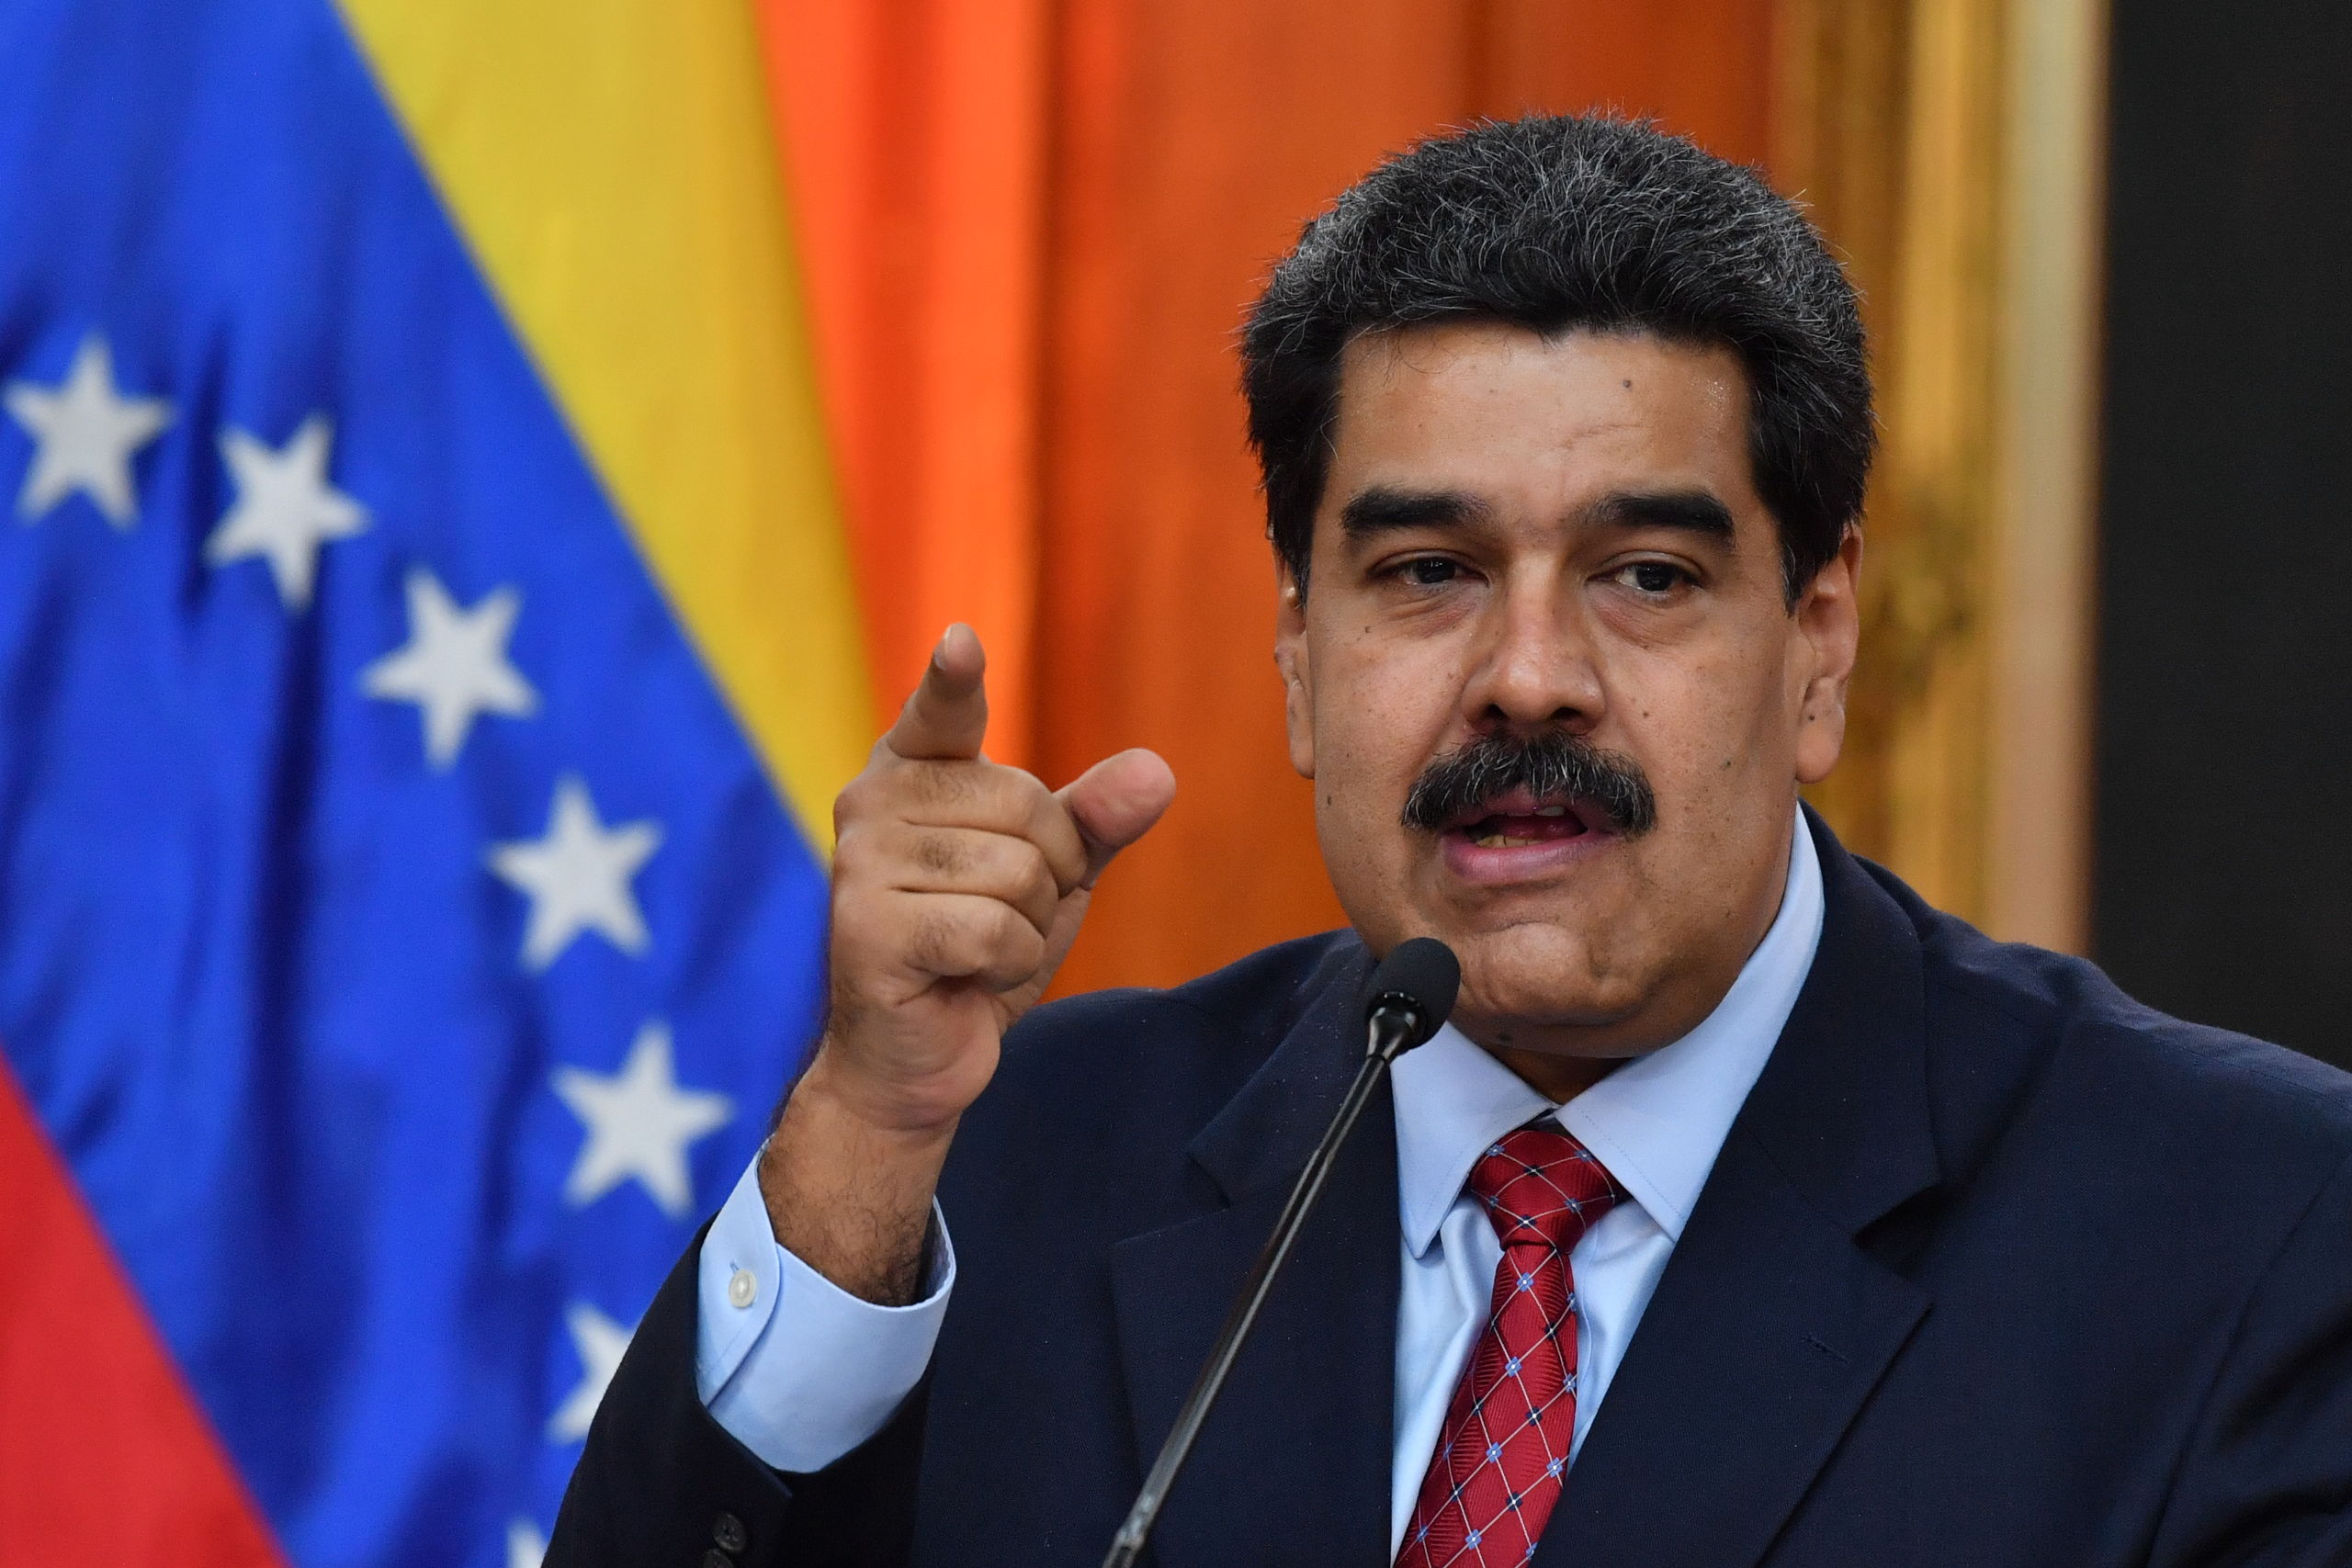 (FILES) In this file photo taken on January 25, 2019 Venezuelan President Nicolas Maduro offers a press conference in Caracas. - Venezuelan President Nicolas Maduro pledged on January 28 to retaliate against the United States for its new sanctions on state oil company PDVSA. (Photo by Yuri CORTEZ / AFP)